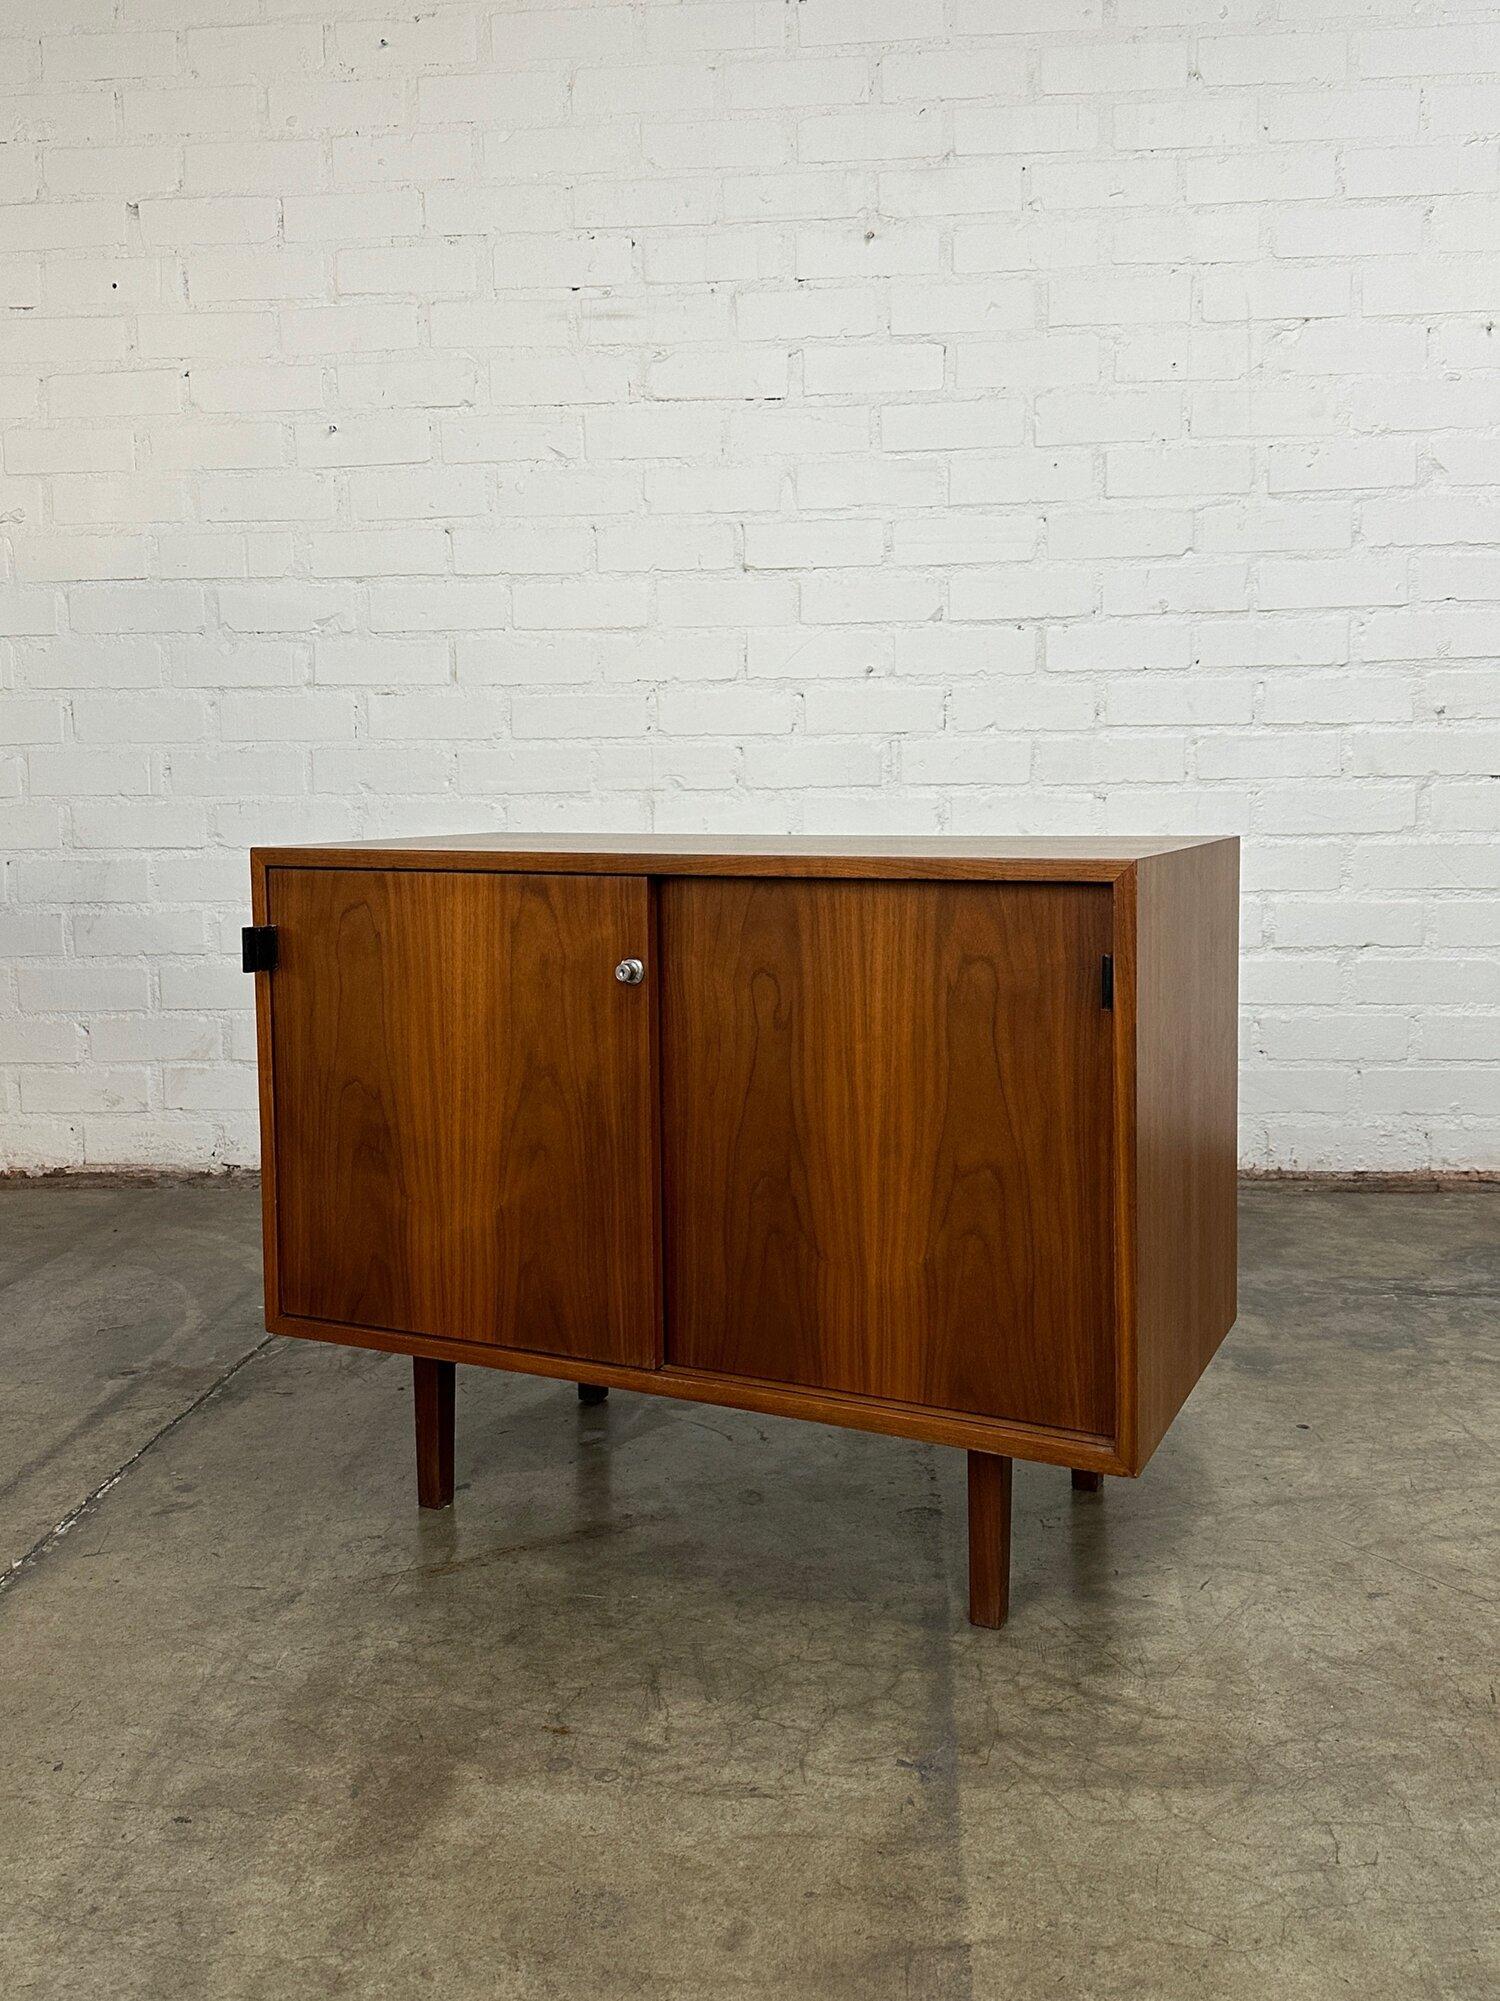 W36 D18 H27.5

Florence knoll compact media or office credenza. Item is fully restored with the exception of the original leather pulls. Item has a new lock and key. Cabinet is structurally sound and fully functional. 